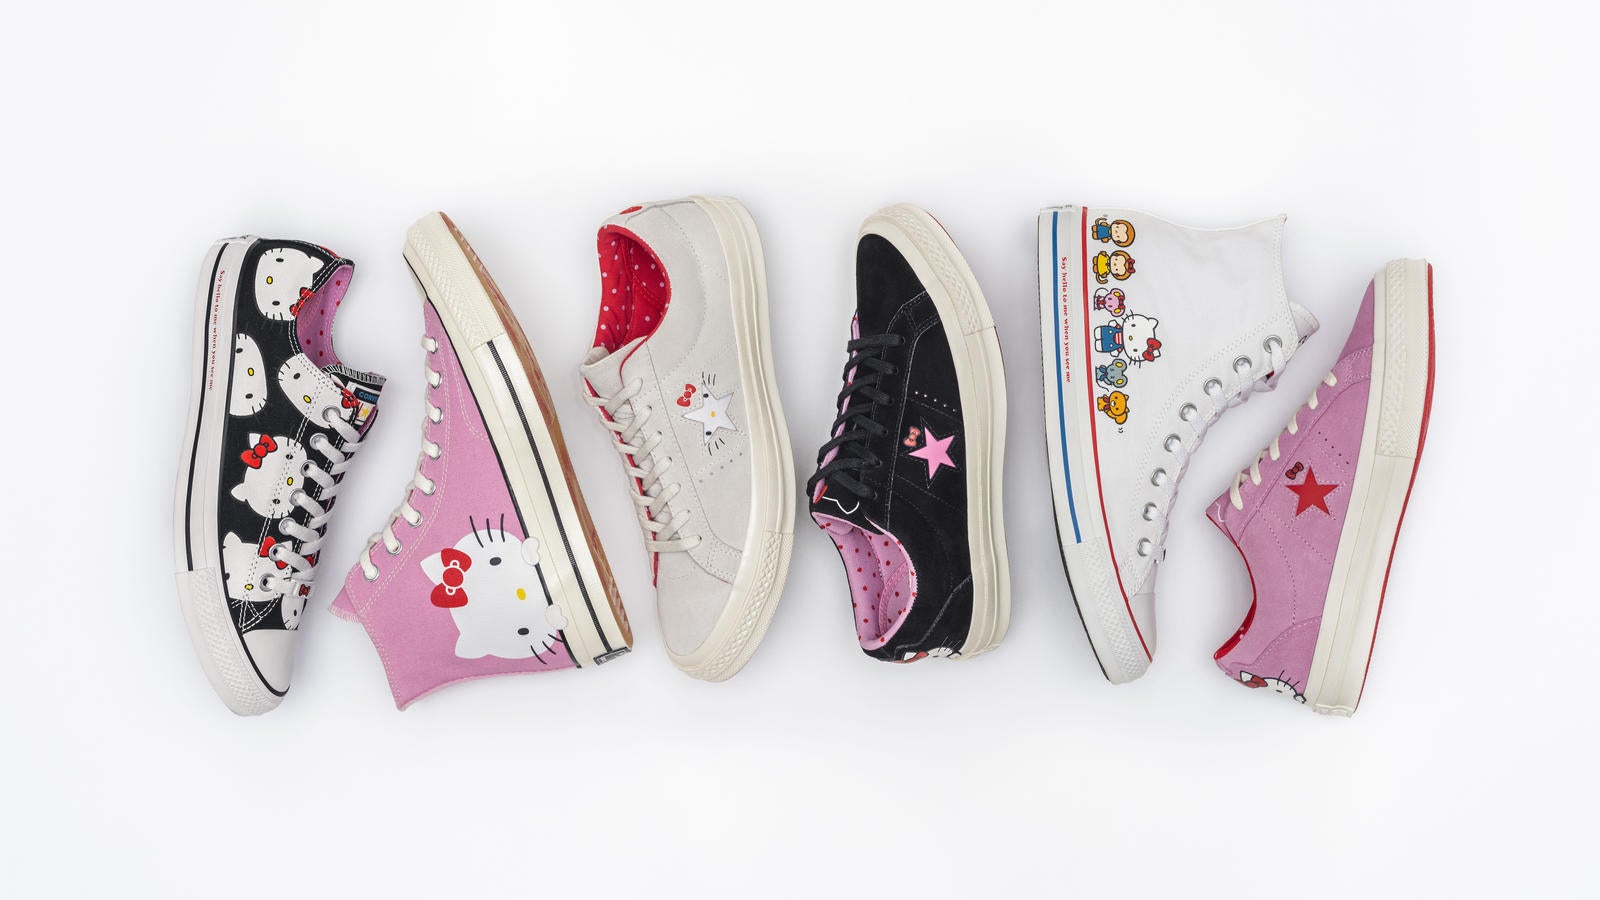 converse hello kitty sneakers